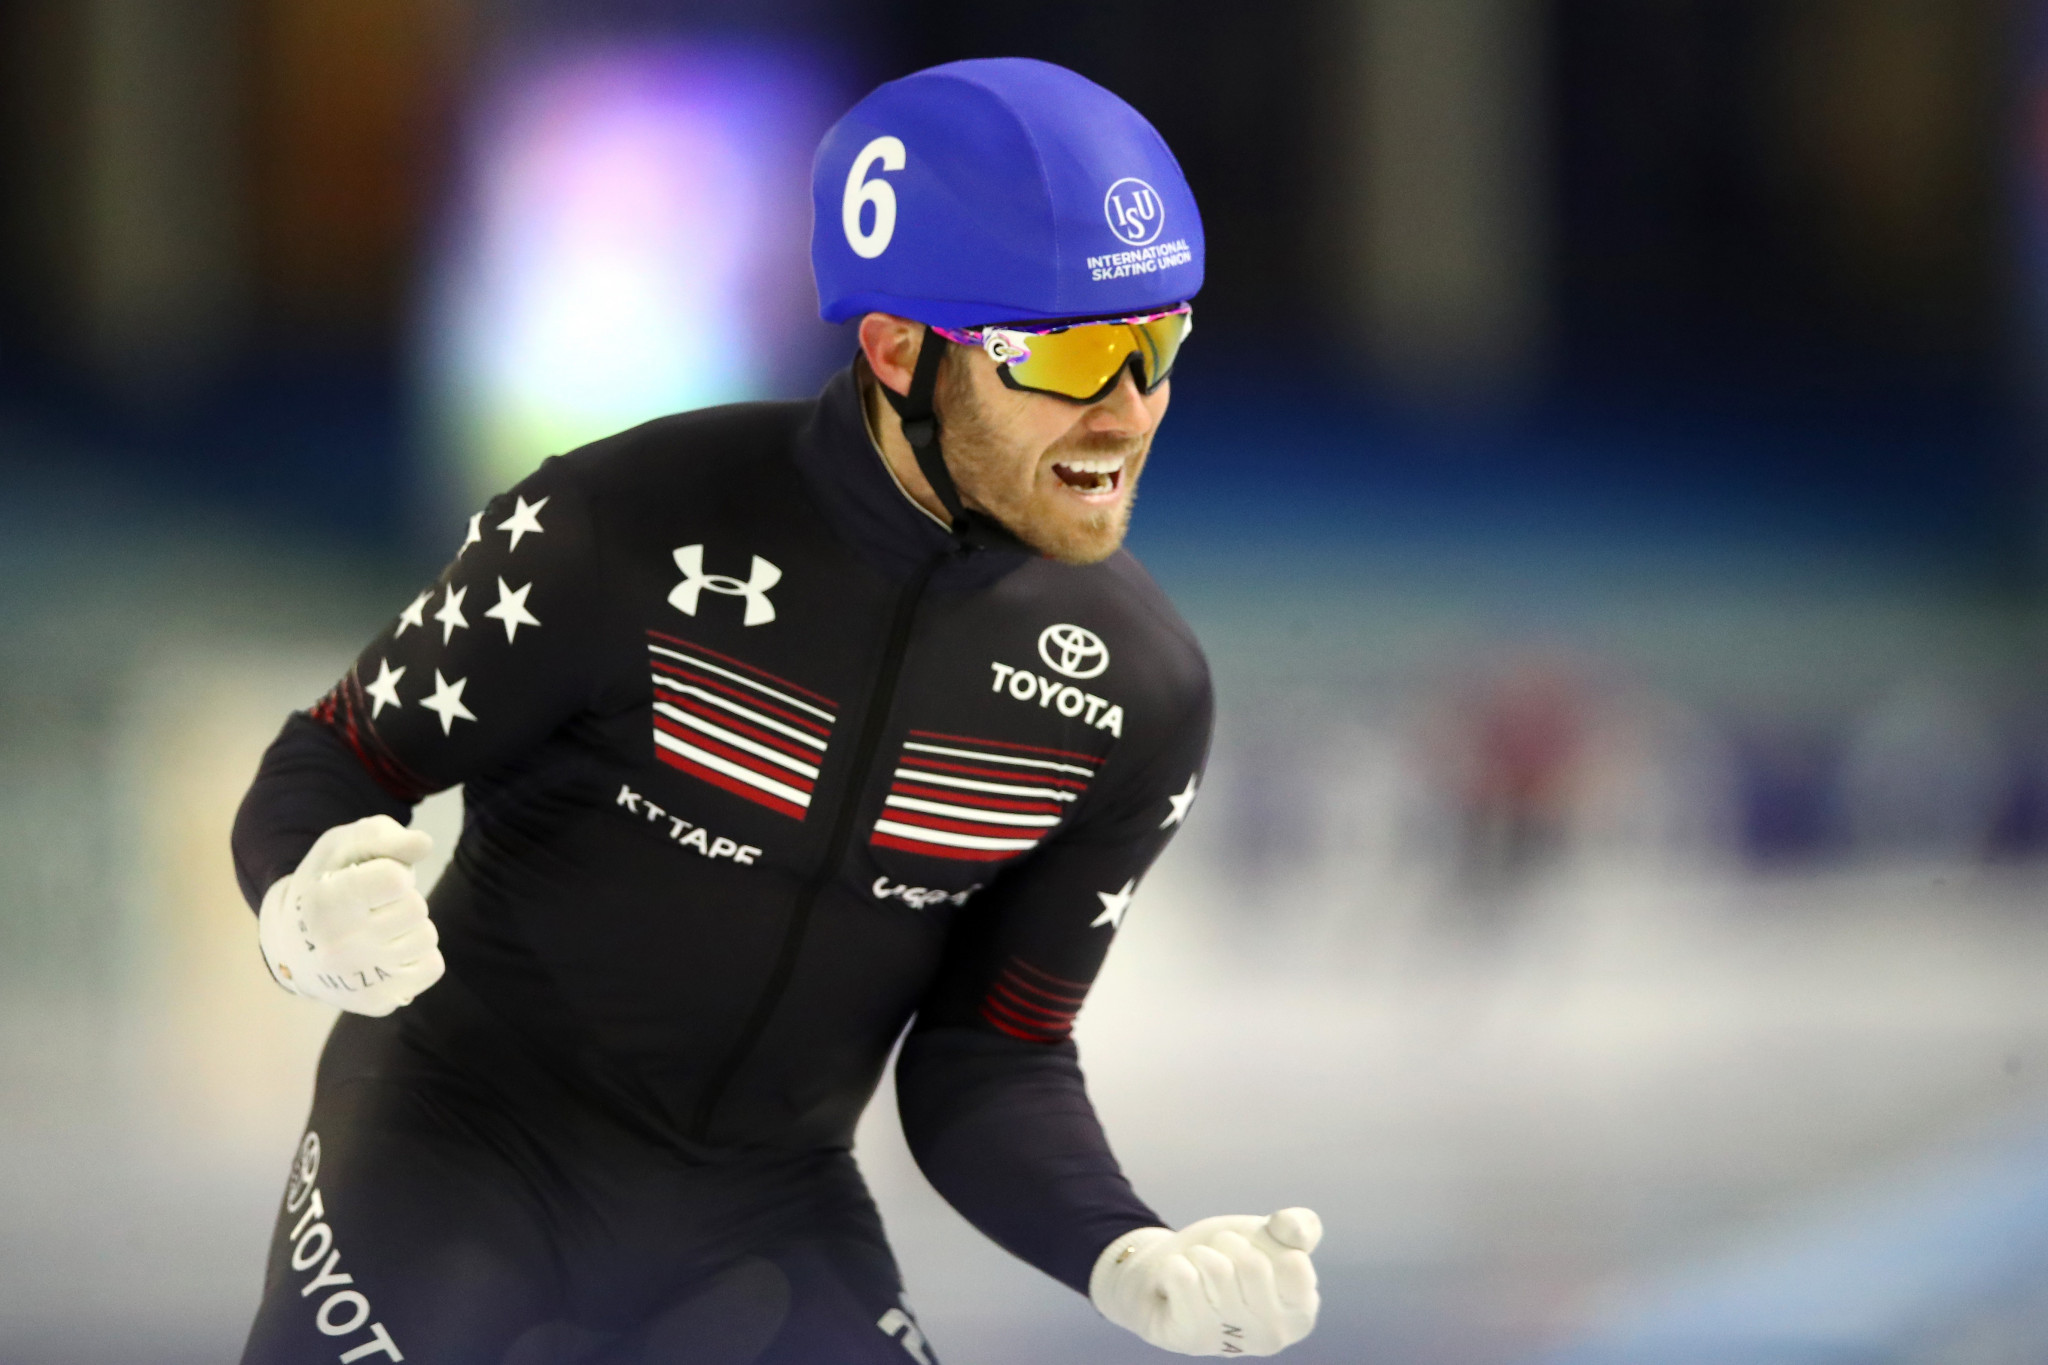 Mantia leads US to team pursuit world record at home ISU World Cup Speed Skating